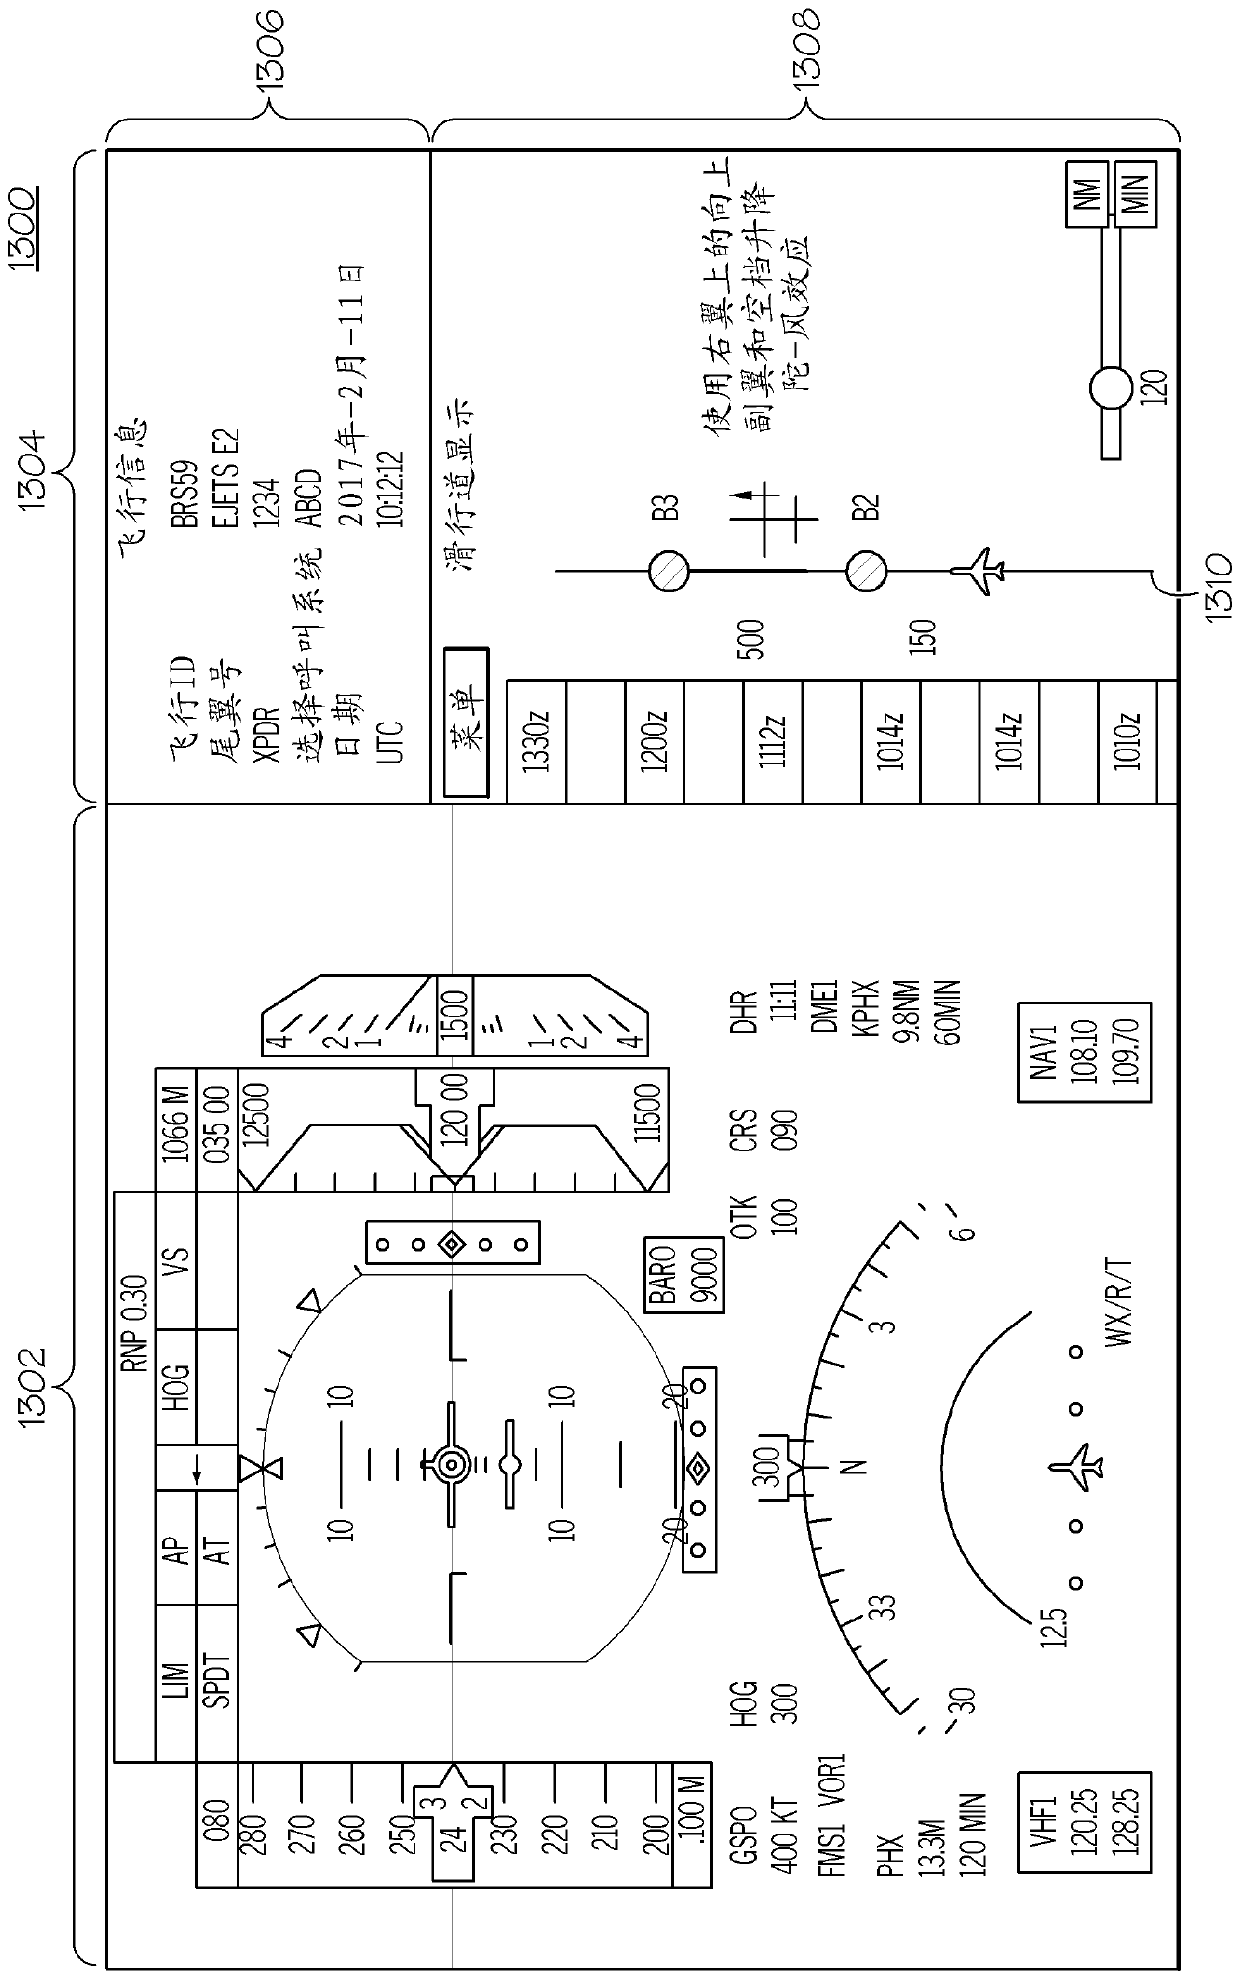 Systems and methods for presenting an intuitive timeline visualization via an avionics primary flight display (PFD)